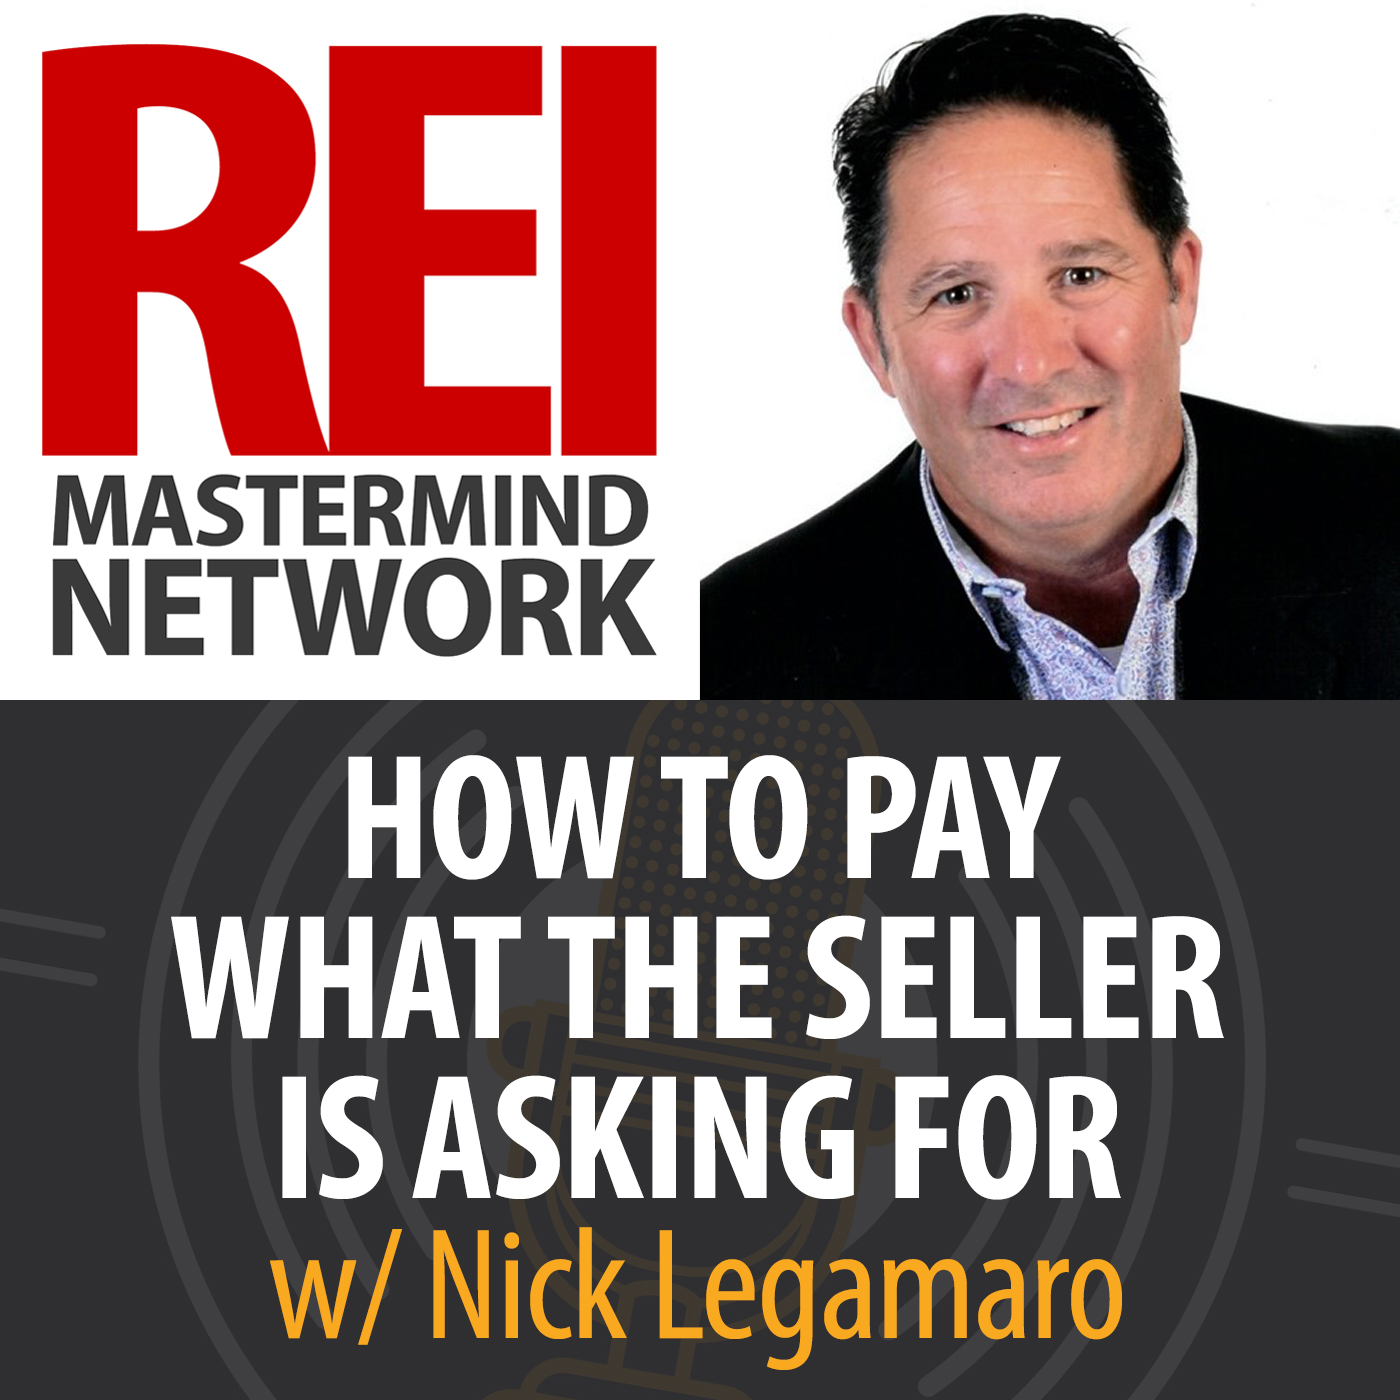 How To Pay What the Seller Is Asking for with Nick Legamaro